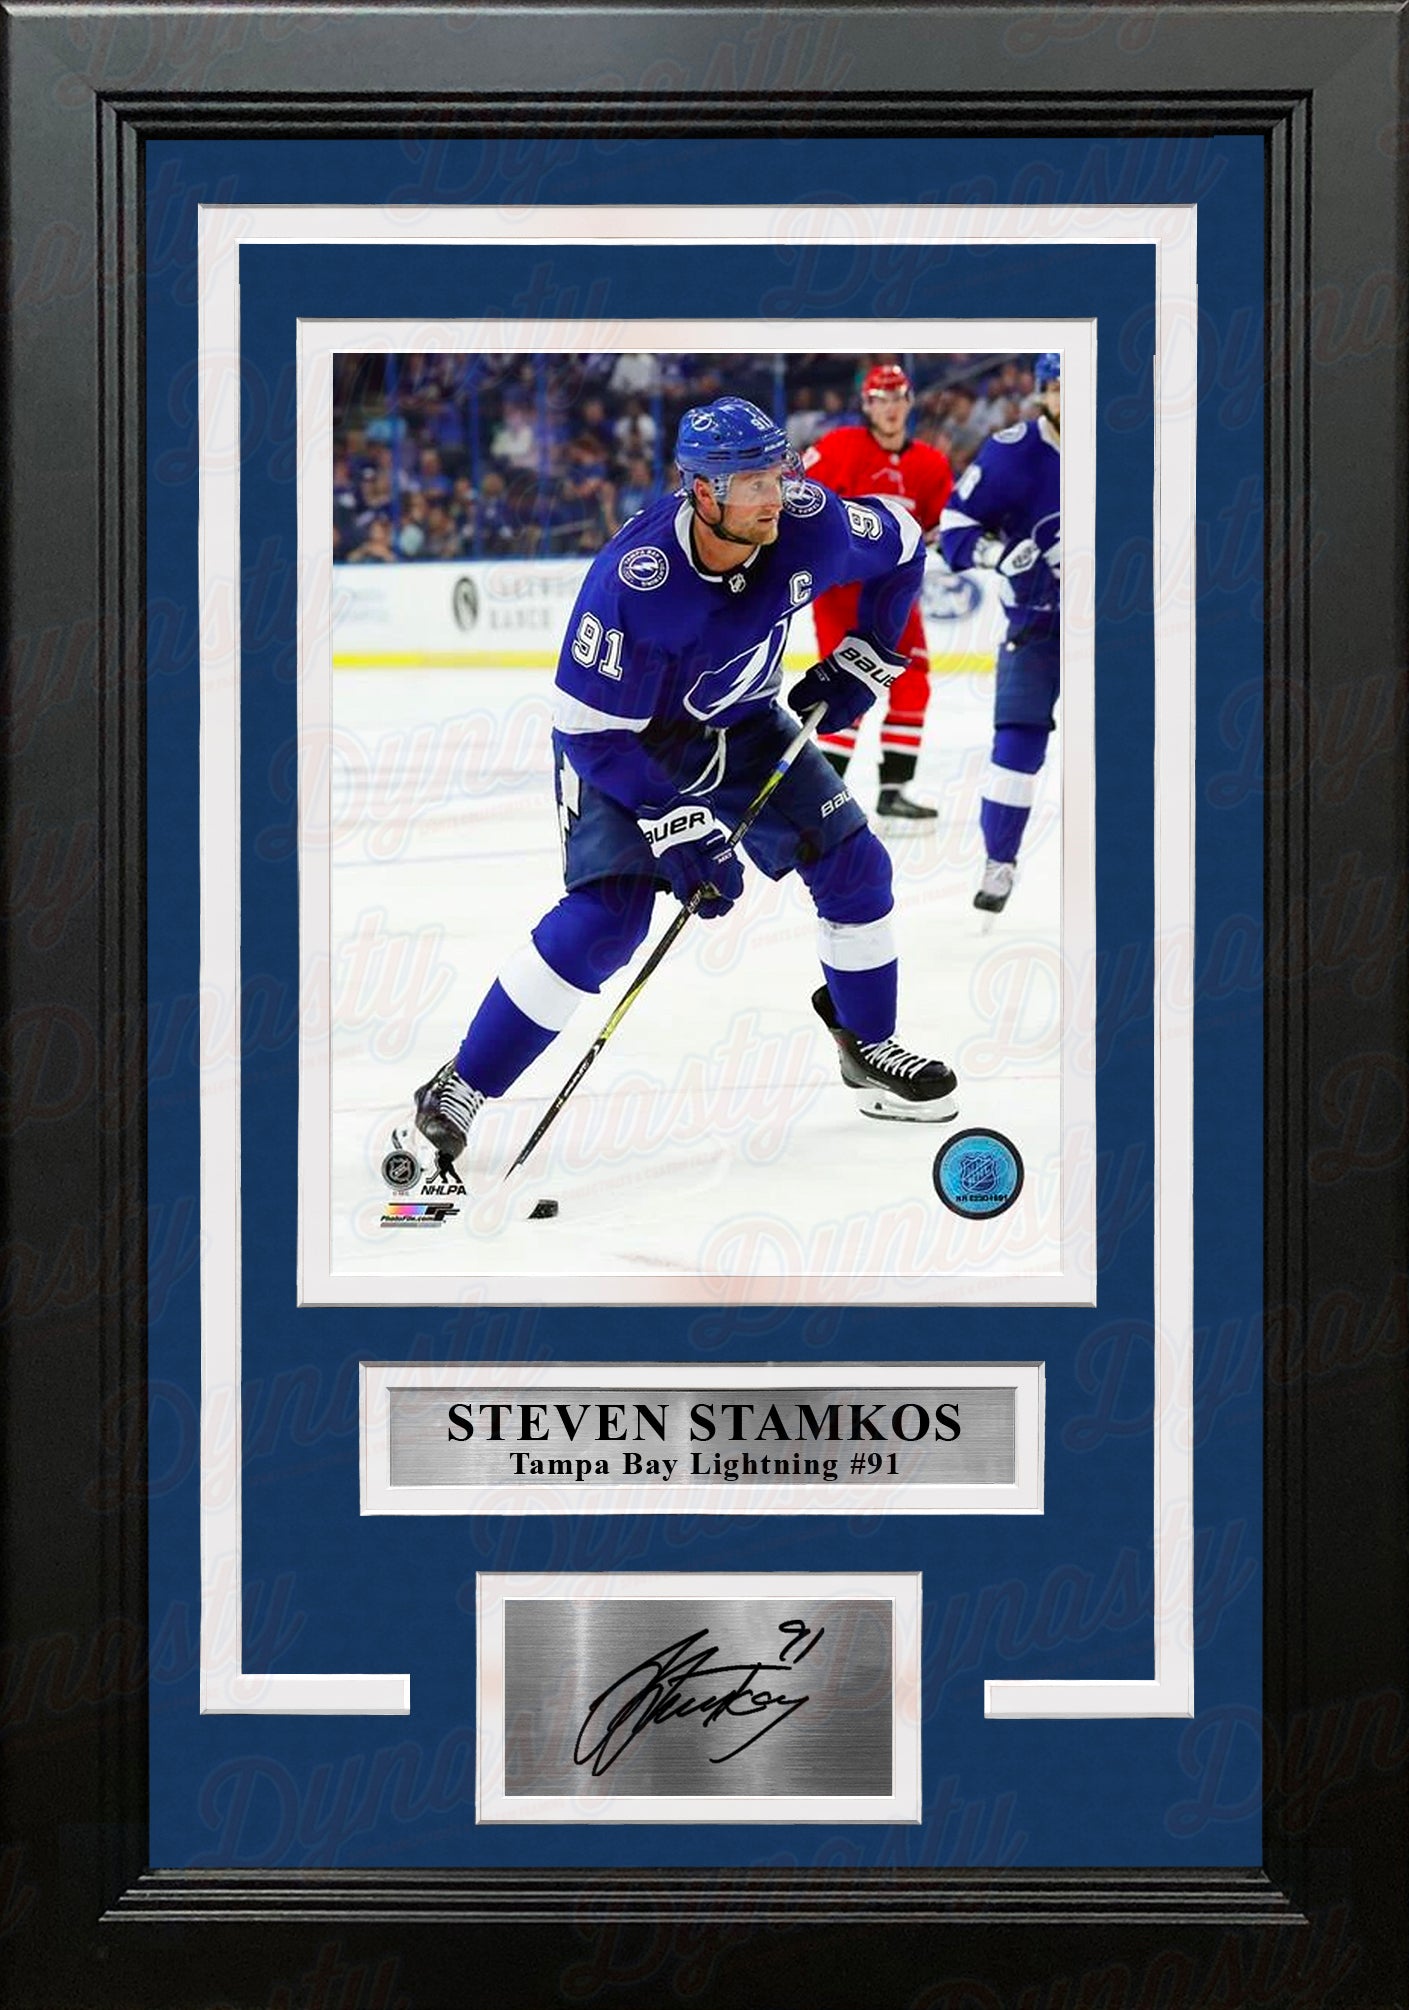 Steven Stamkos Tampa Bay Lightning Autographed White Bauer Helmet with Go Bolts Inscription - Art by Stadium Custom Kicks Limited Edition #1 of 1